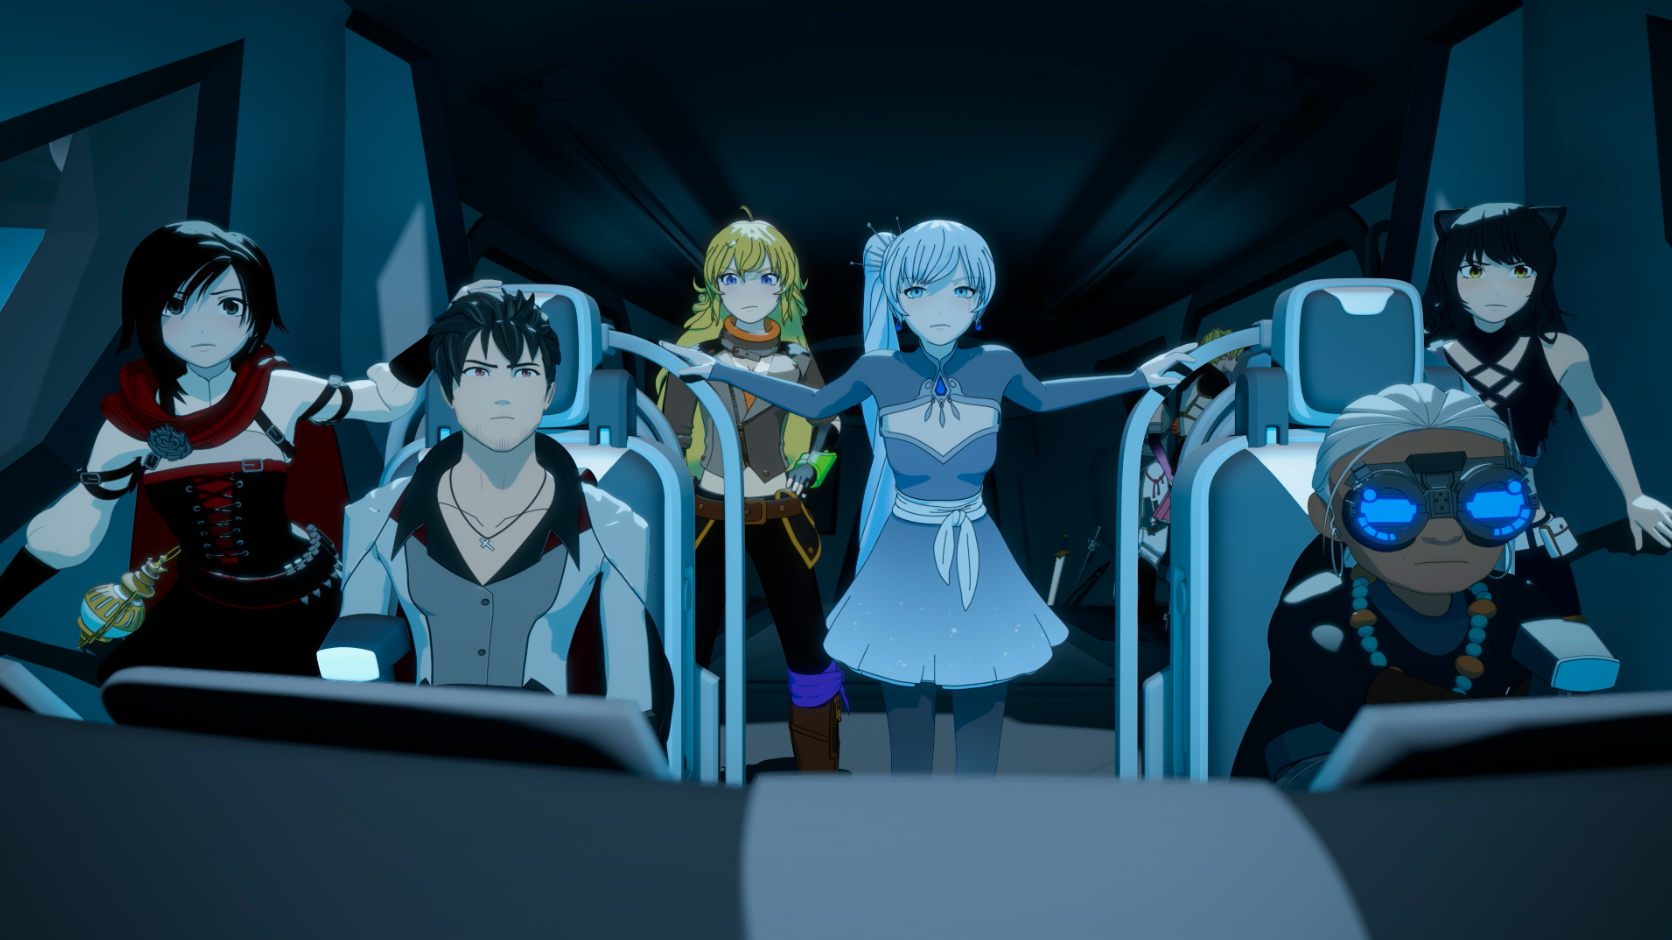 'RWBY' Volume 7 Trailer and Footage Shown at NYCC 2019 Panel